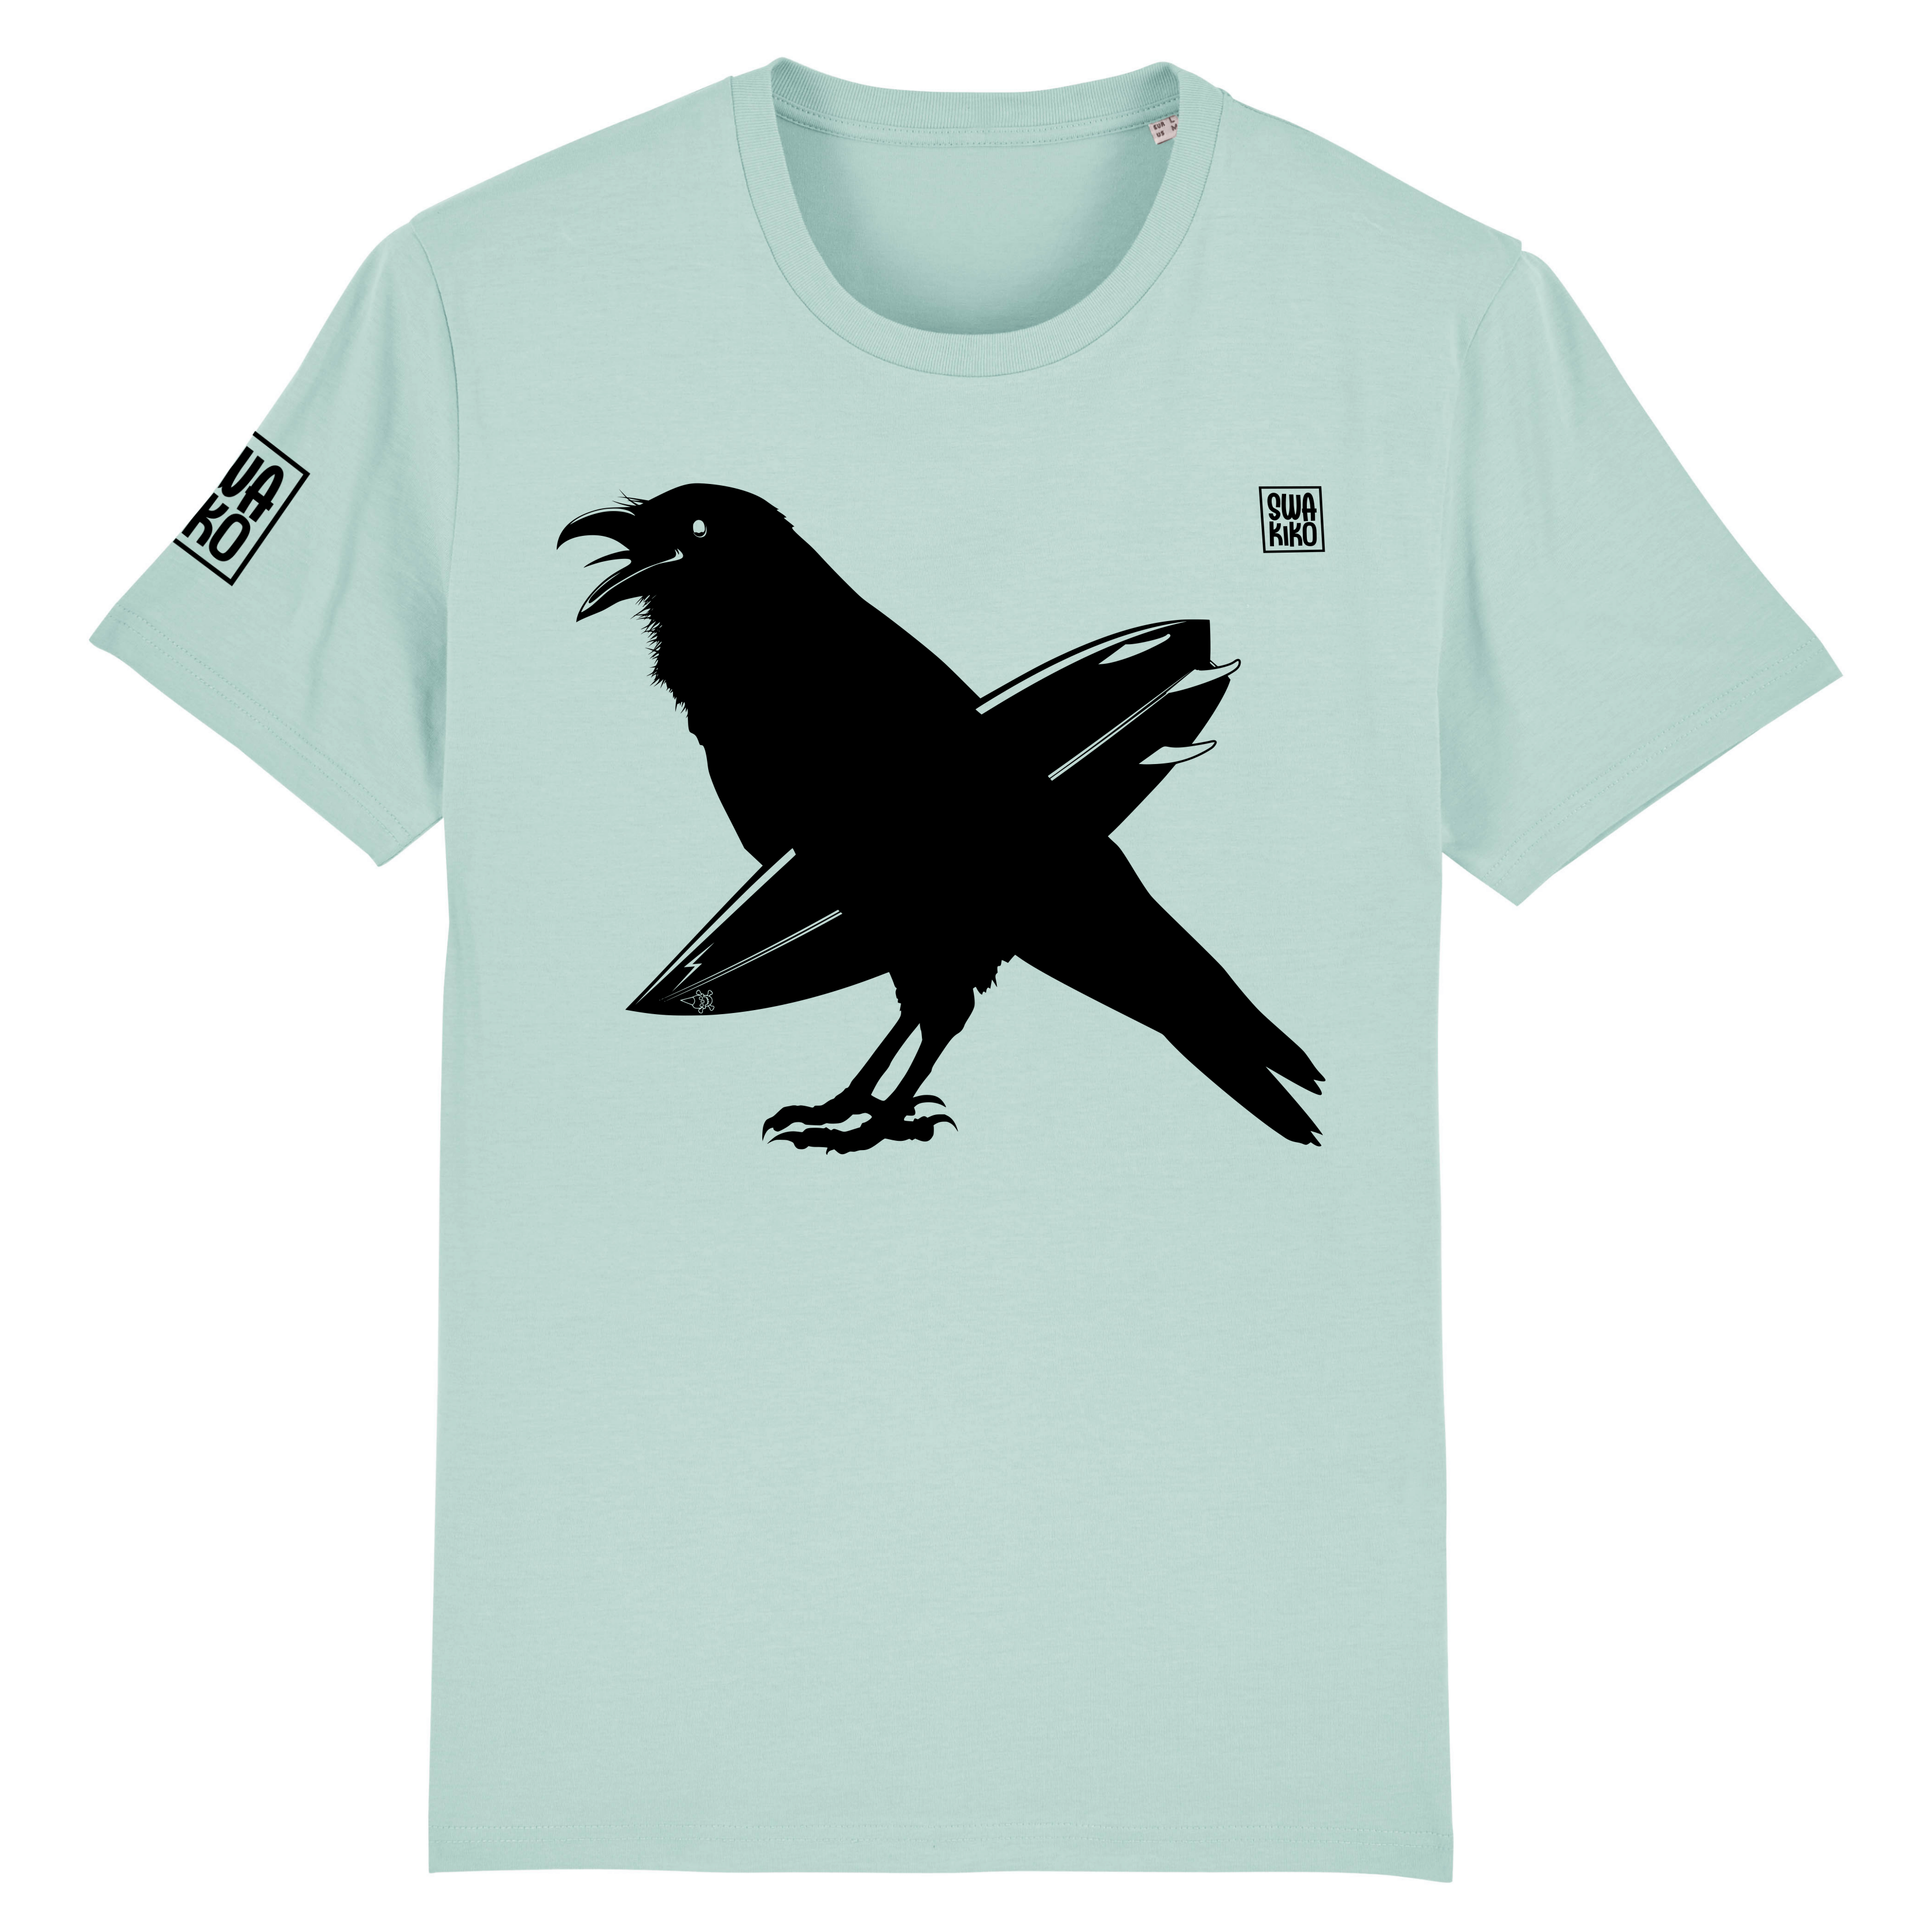 Surf t-shirt men turquoise, The Snaking Crow